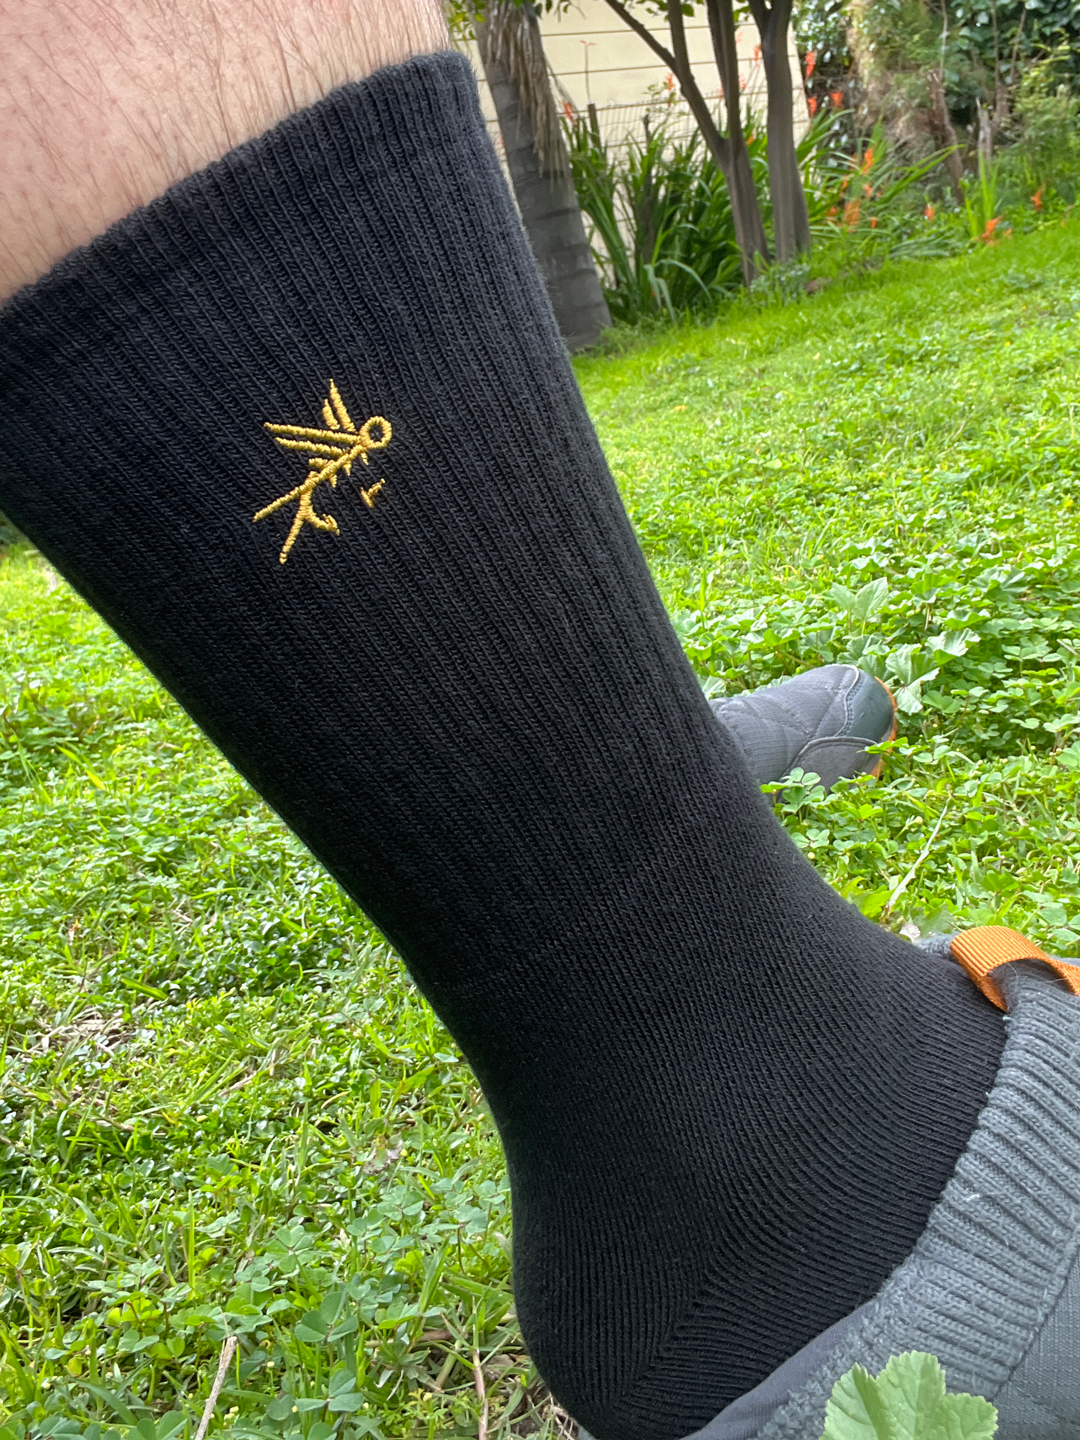 The Barbless Fly Socks